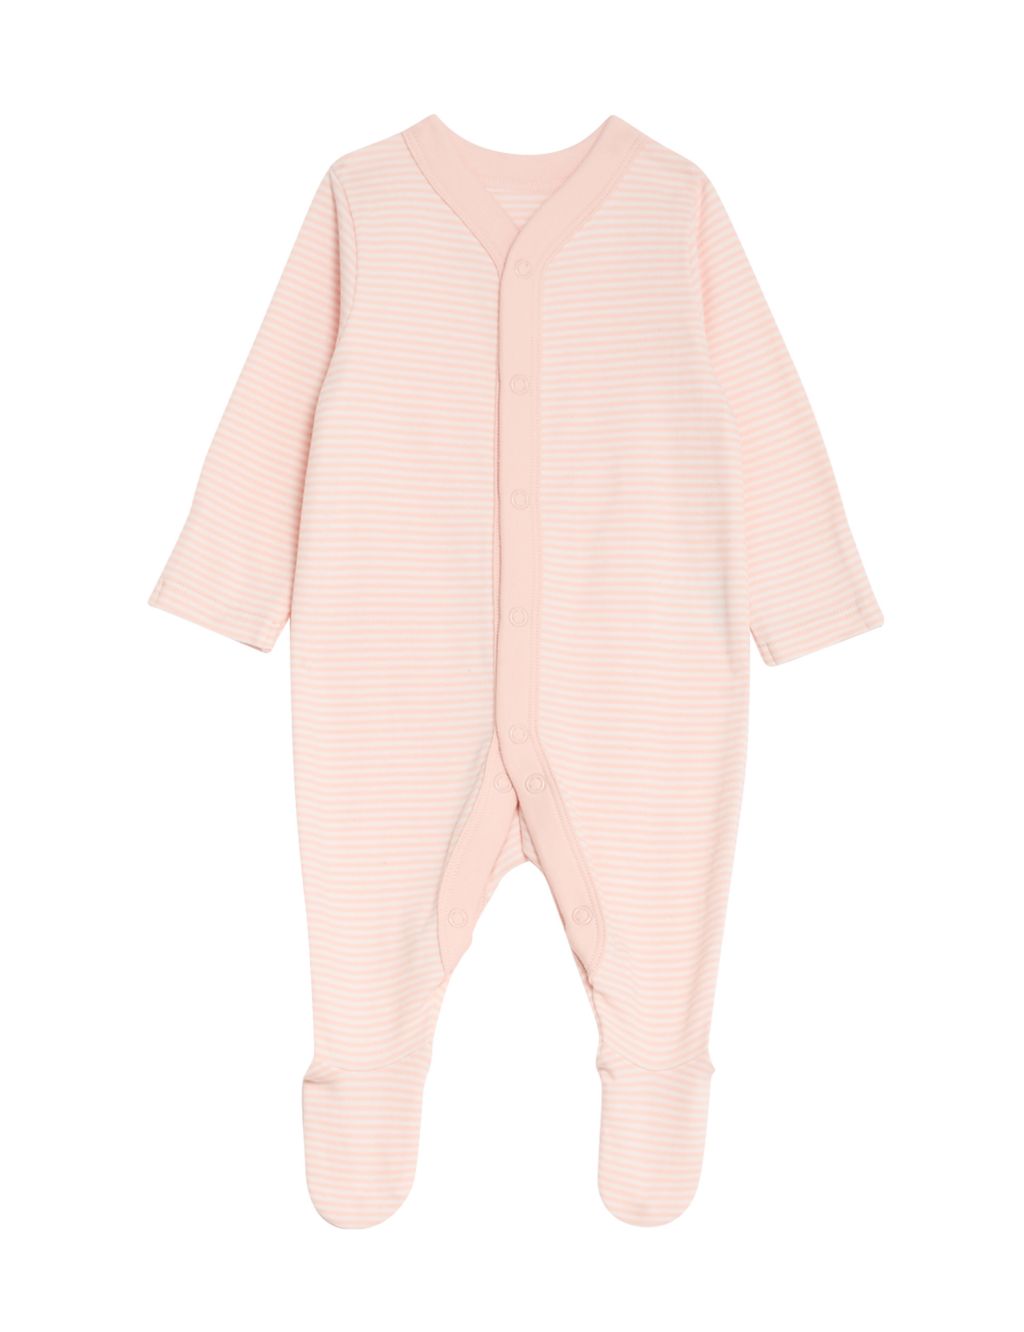 3pk Pure Cotton Bunny & Striped Sleepsuits (5lbs-3 Yrs) image 3